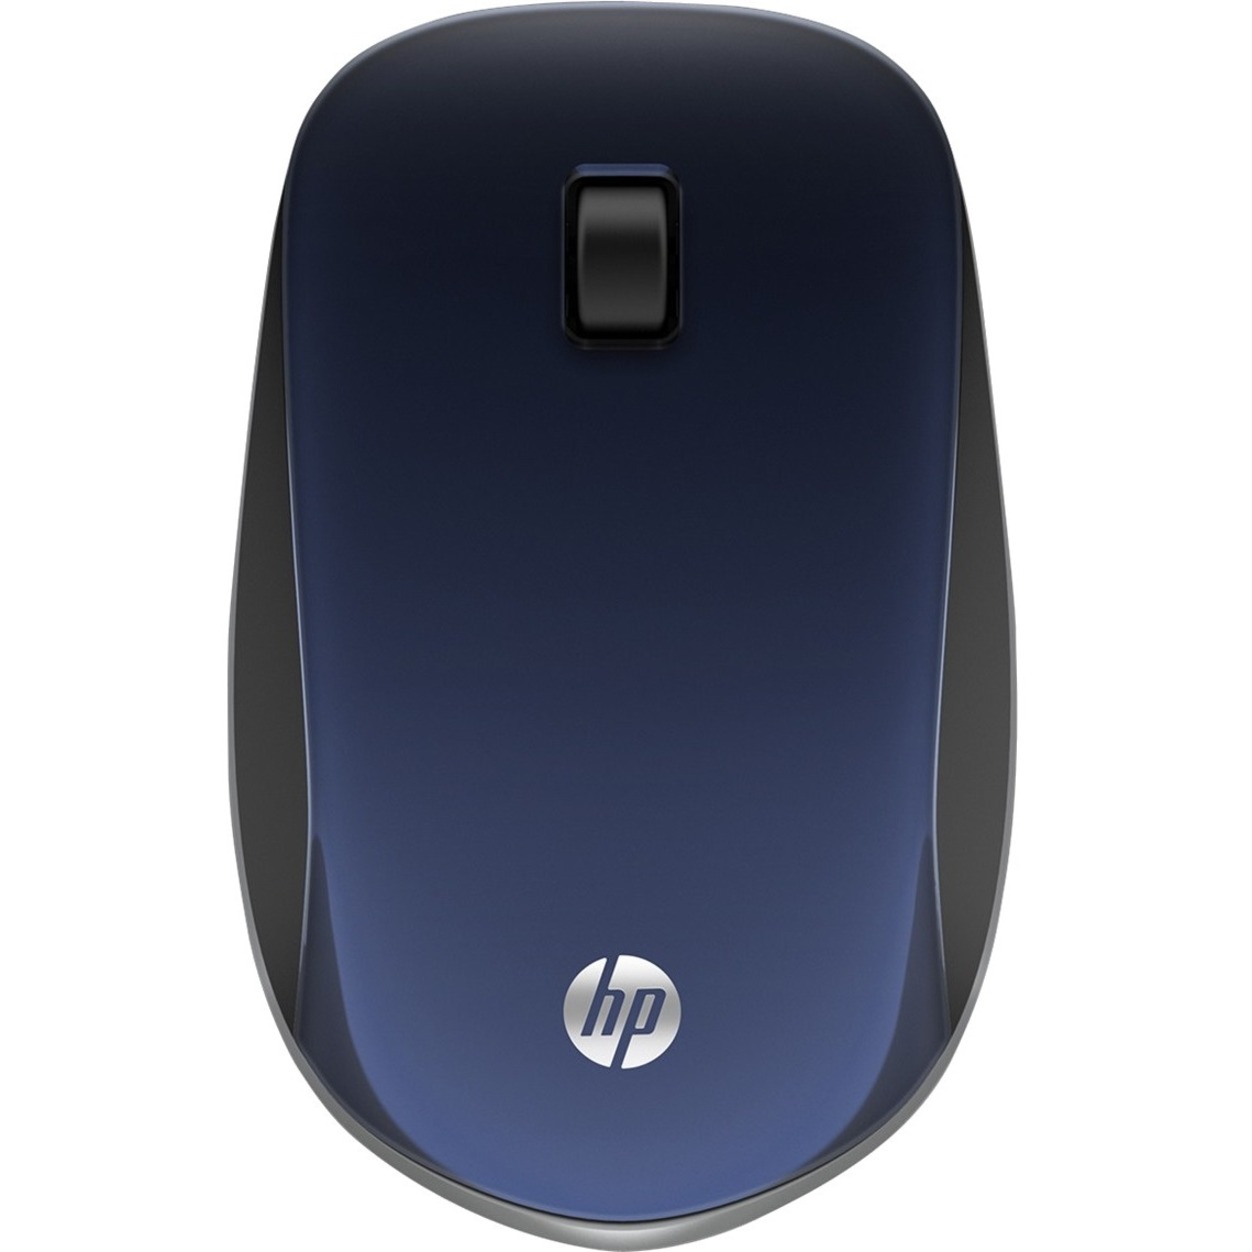 HP Wireless Mouse Z4000 (Blue) - image 1 of 5